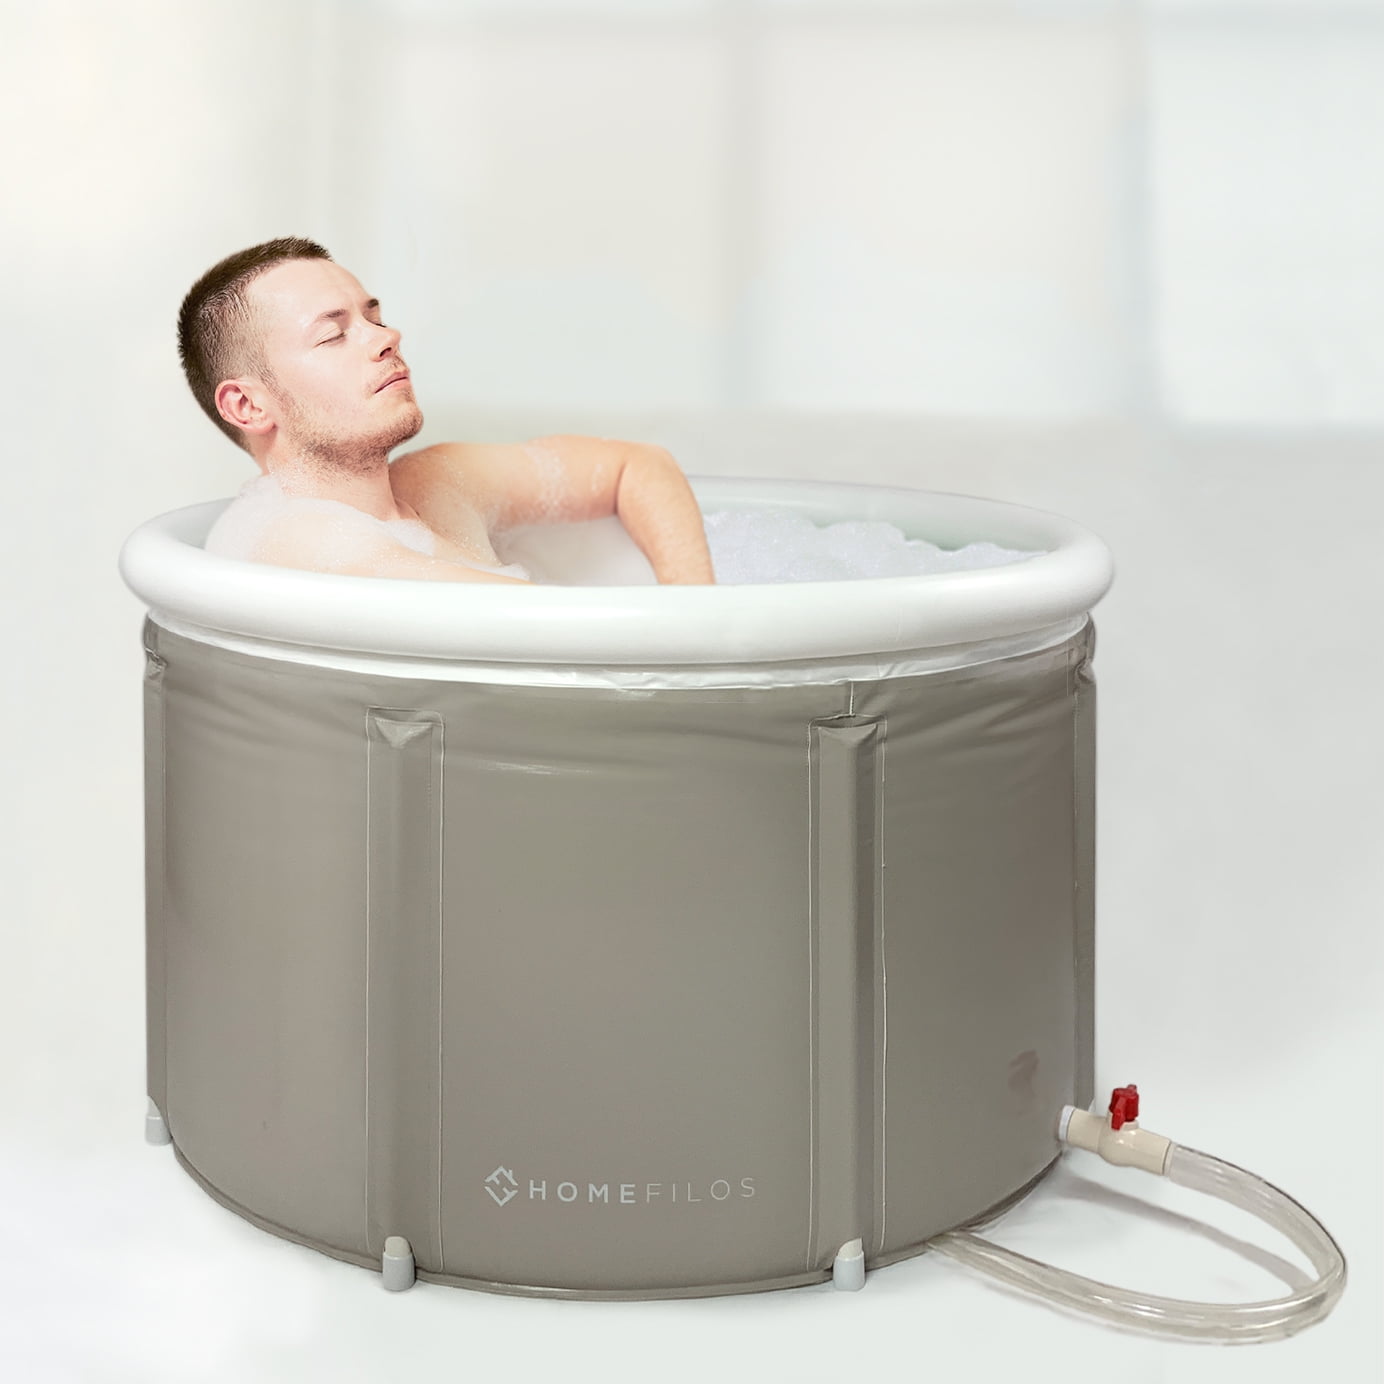 Ice Bath Tub, Ice Bath Tub for Athletes, Portable Ice Bath Tub, Cold Tub  Ice Tub, Inflatable Ice Bath for Outdoor, Cold Therapy Tub by VERNILLA 